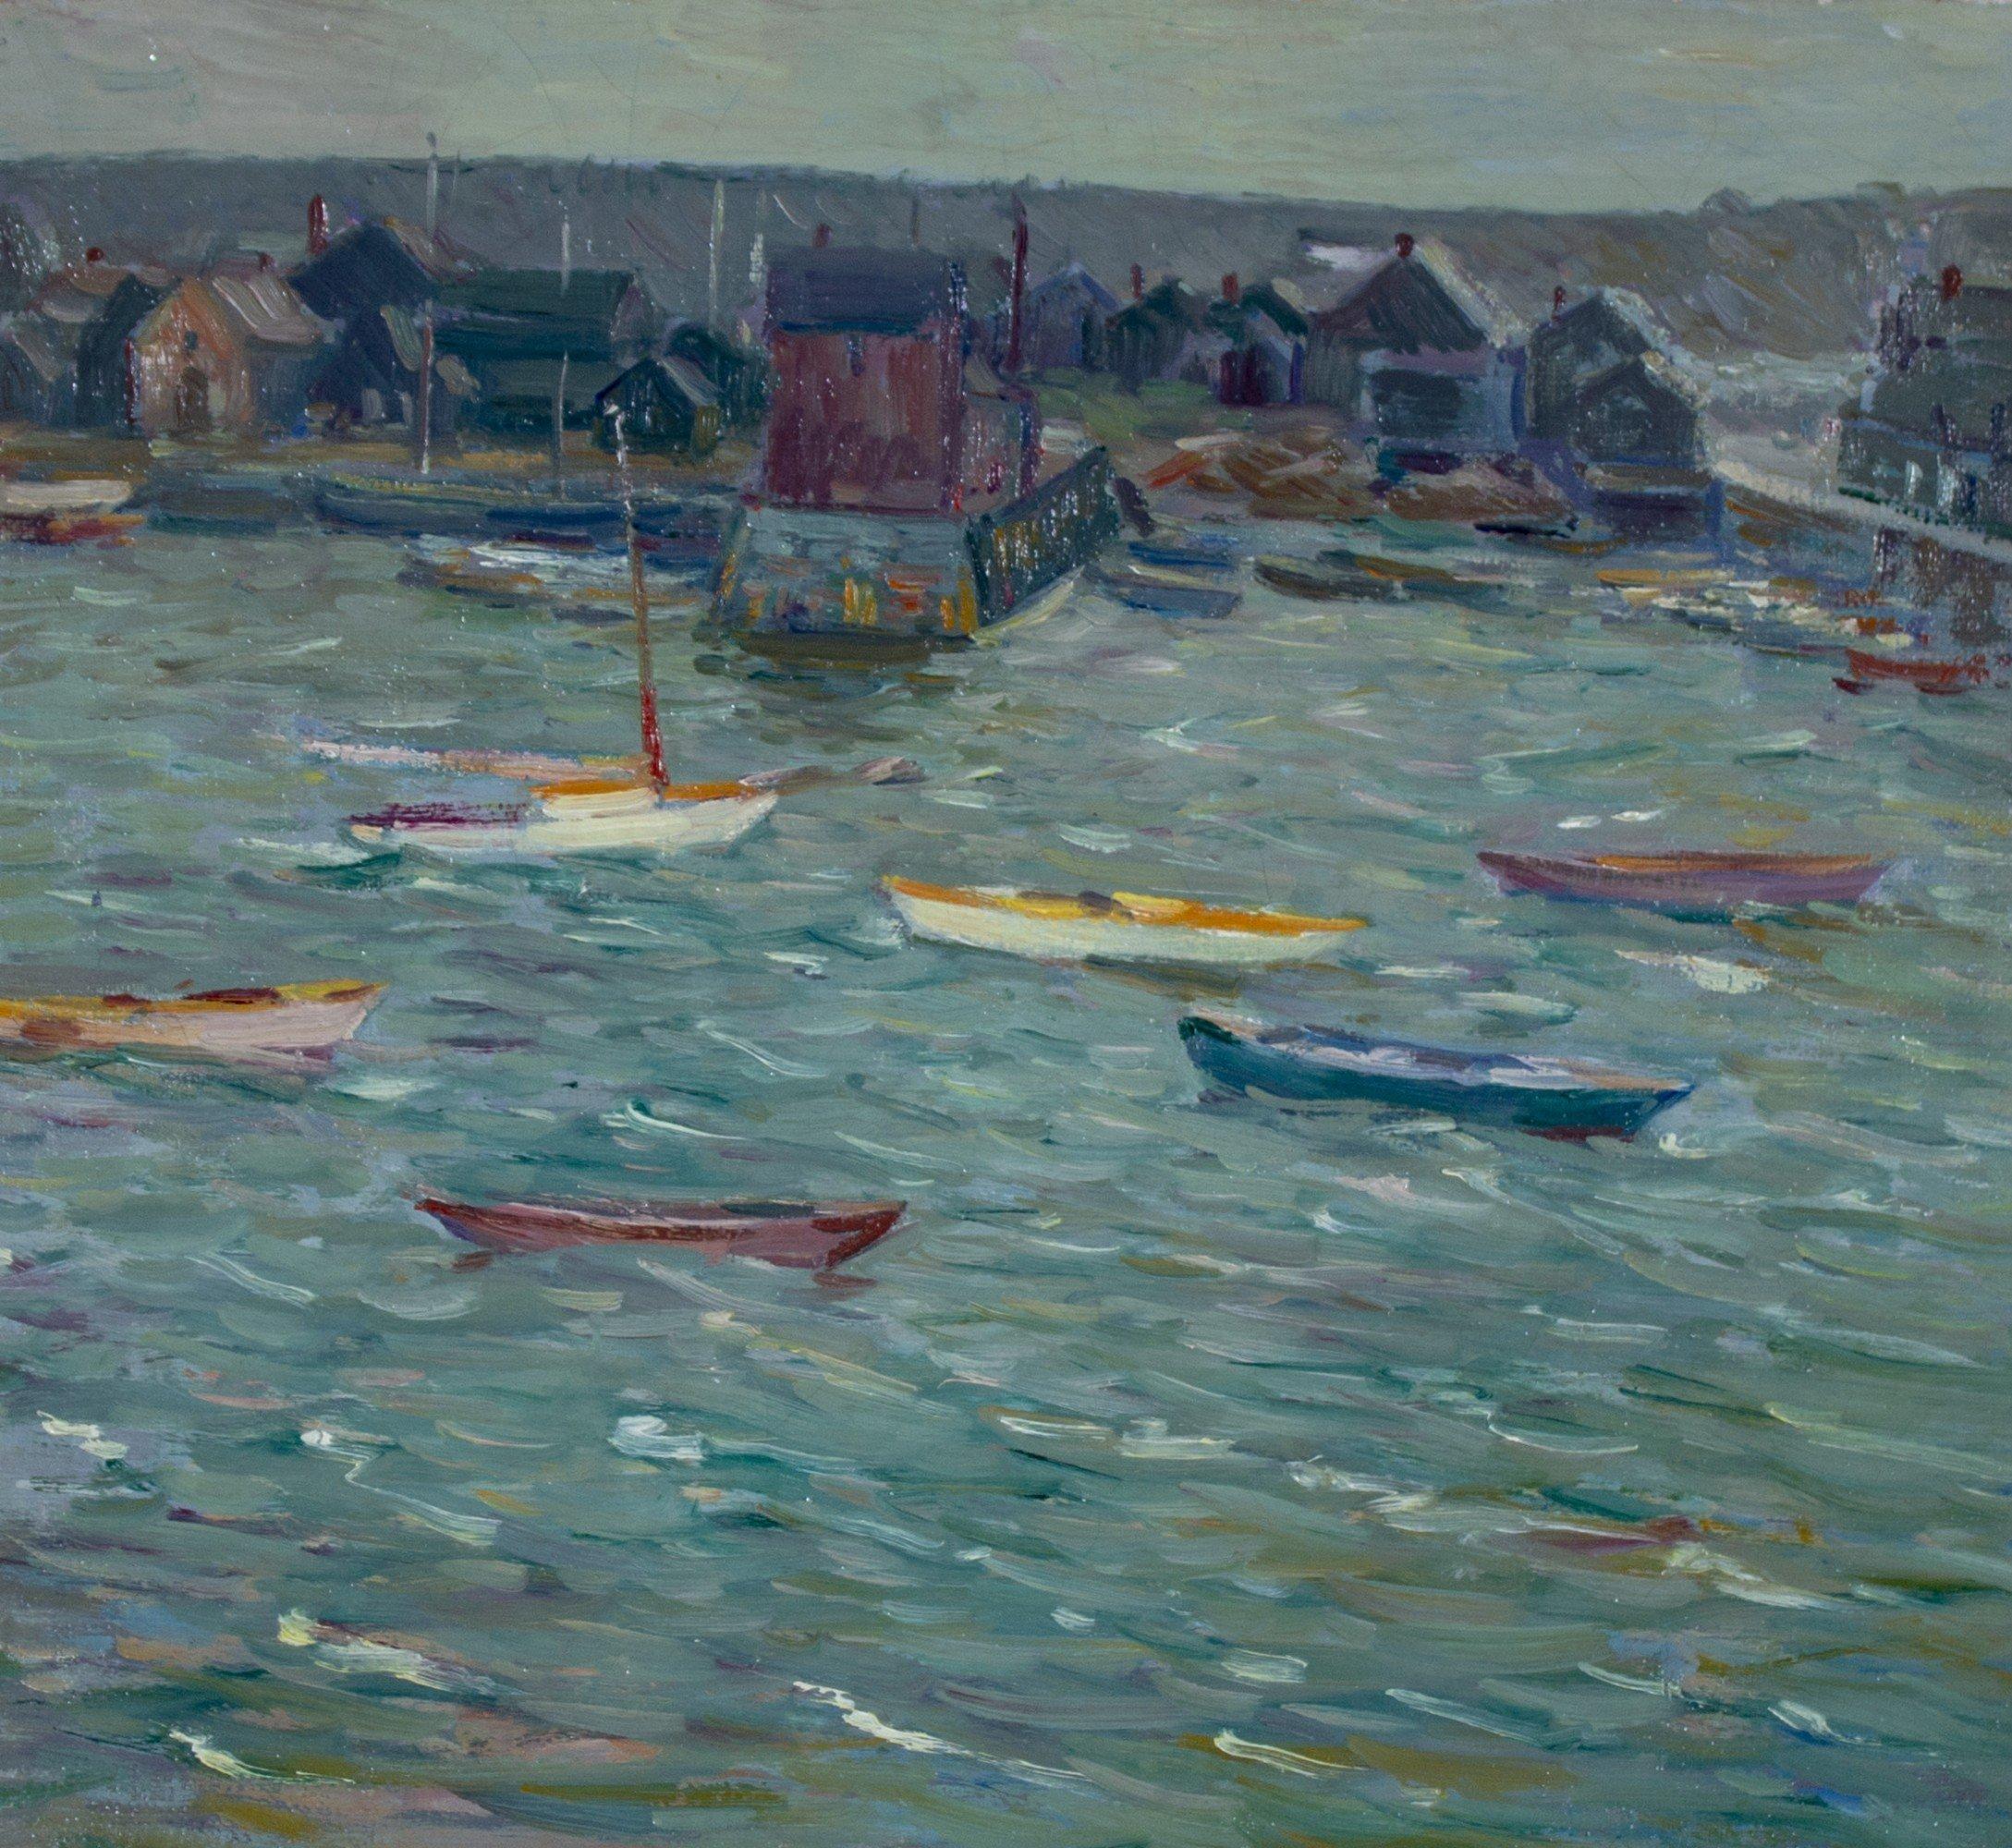 Early 20th Century Impressionist Seascape, Harbor and Town Scene - Painting by Charles Salis Kaelin